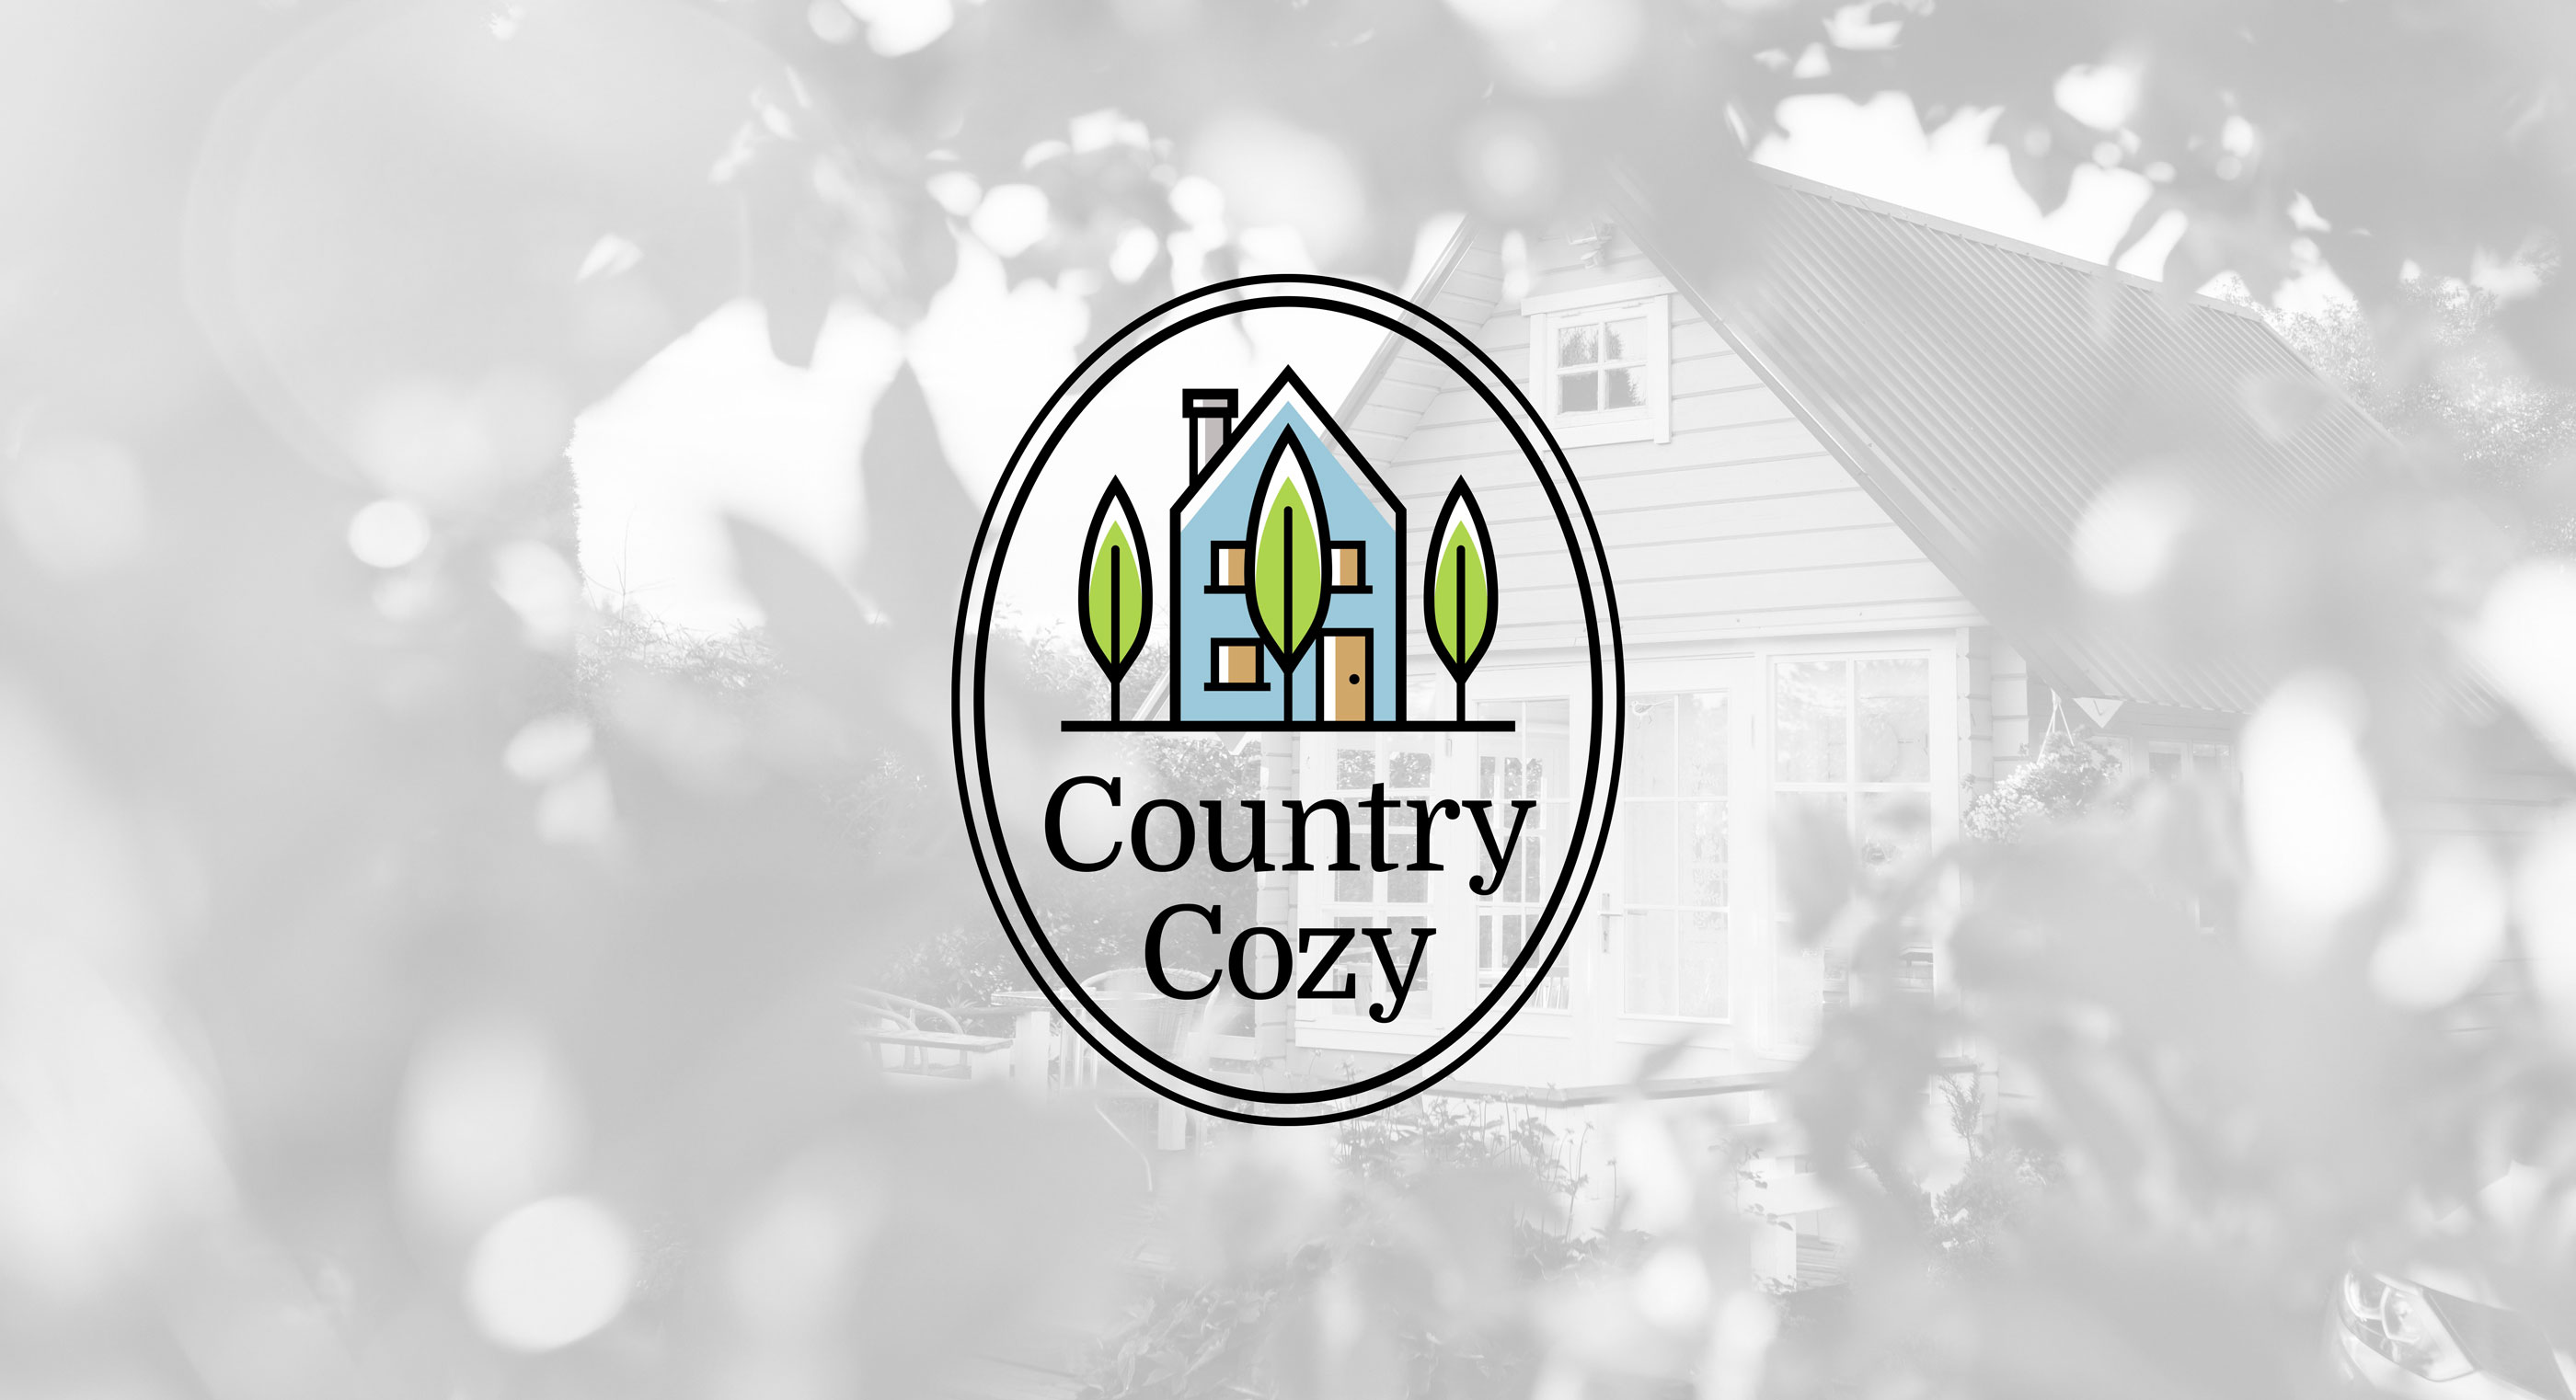 Country Cozy, House Logo Design on a Black and White Photo Background, By Karbon Branding